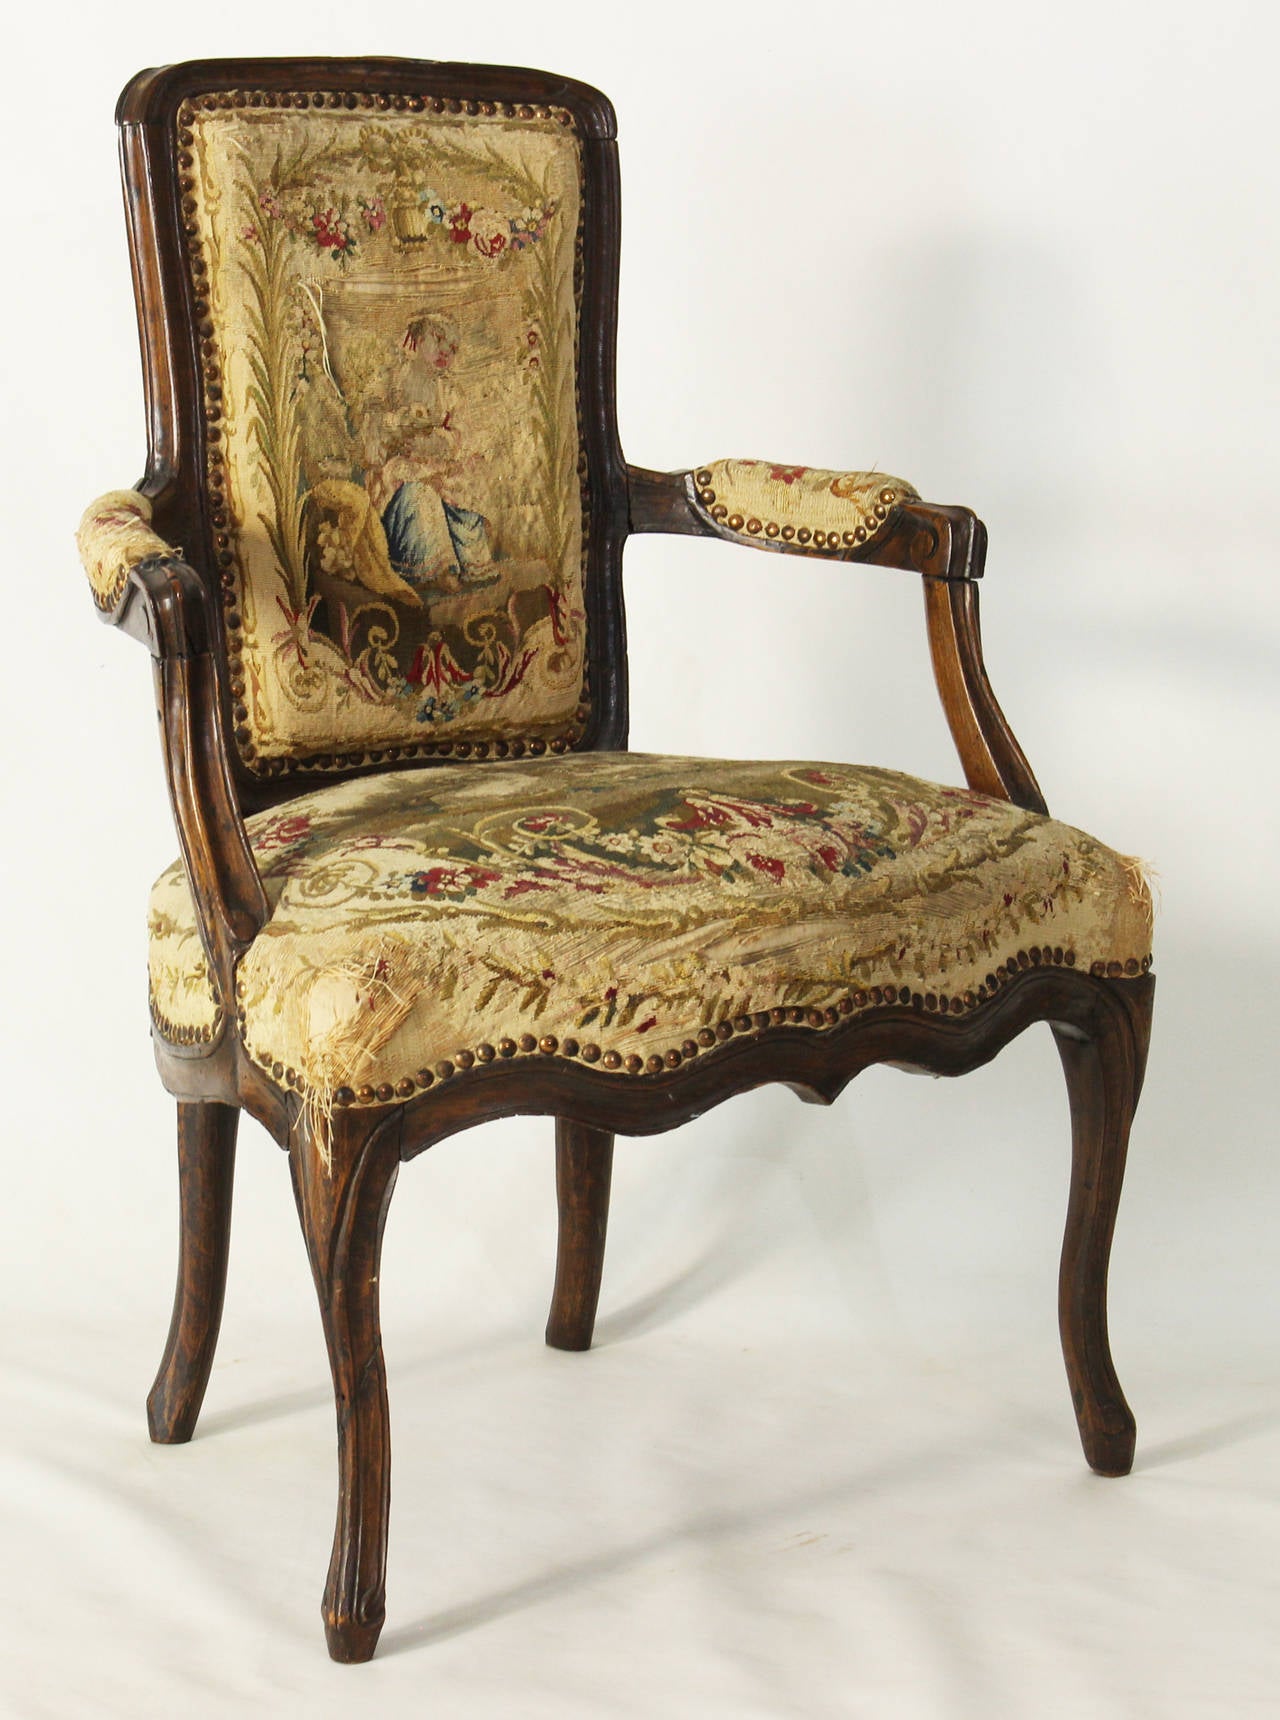 Louis XVI 18th Century Country French Fauteuil